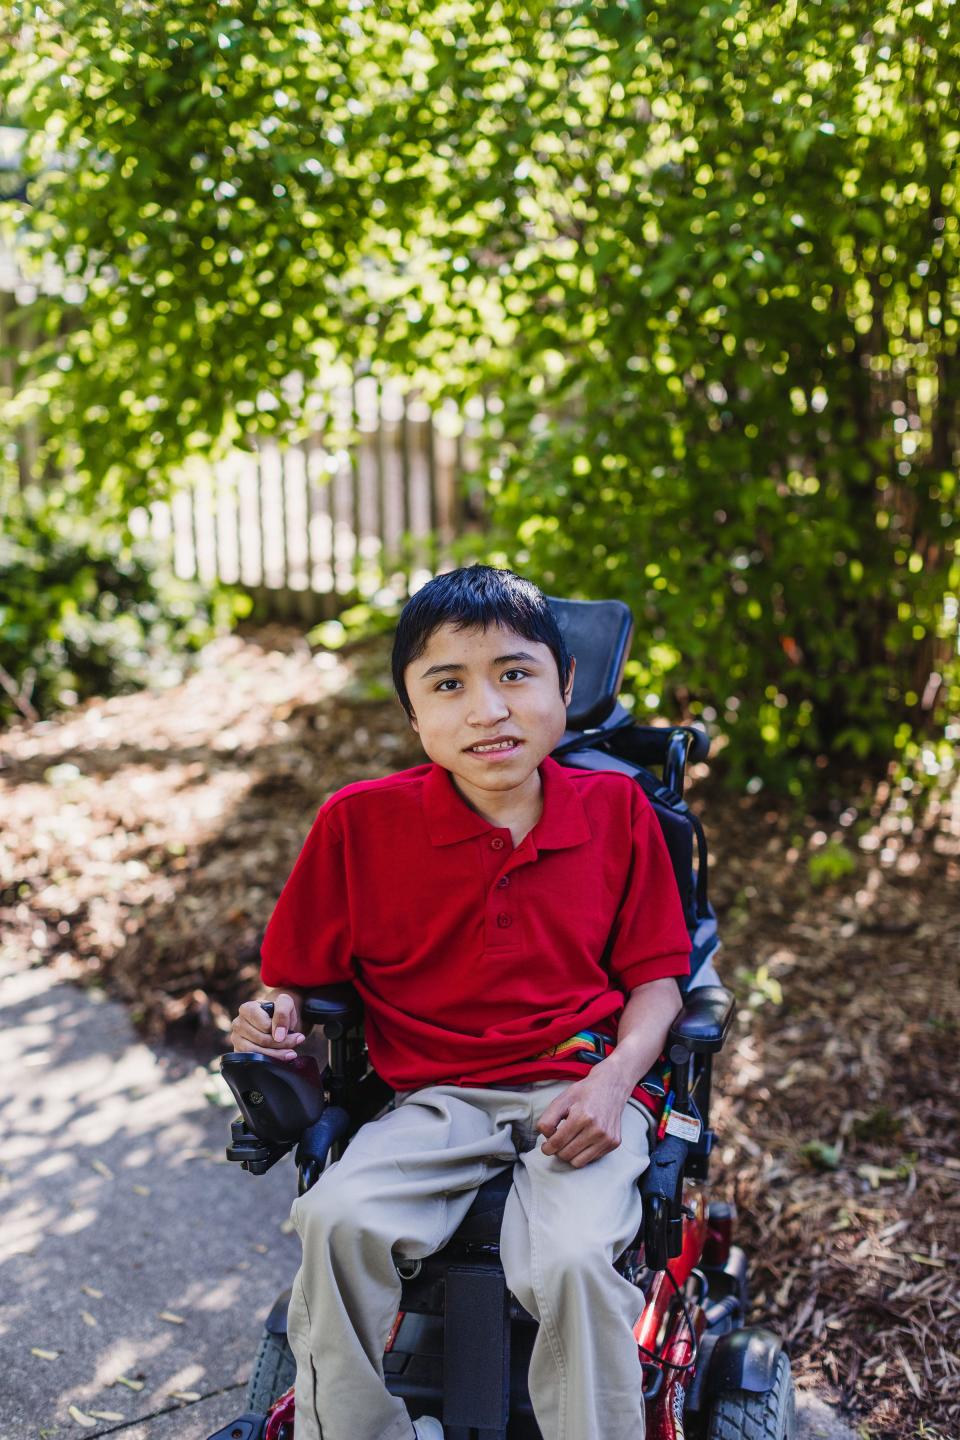 Alejandrino Mateos died Sunday, May 15, at age 16. He had Duchenne muscular dystrophy, a rare genetic disorder causing progressive degeneration of muscles.